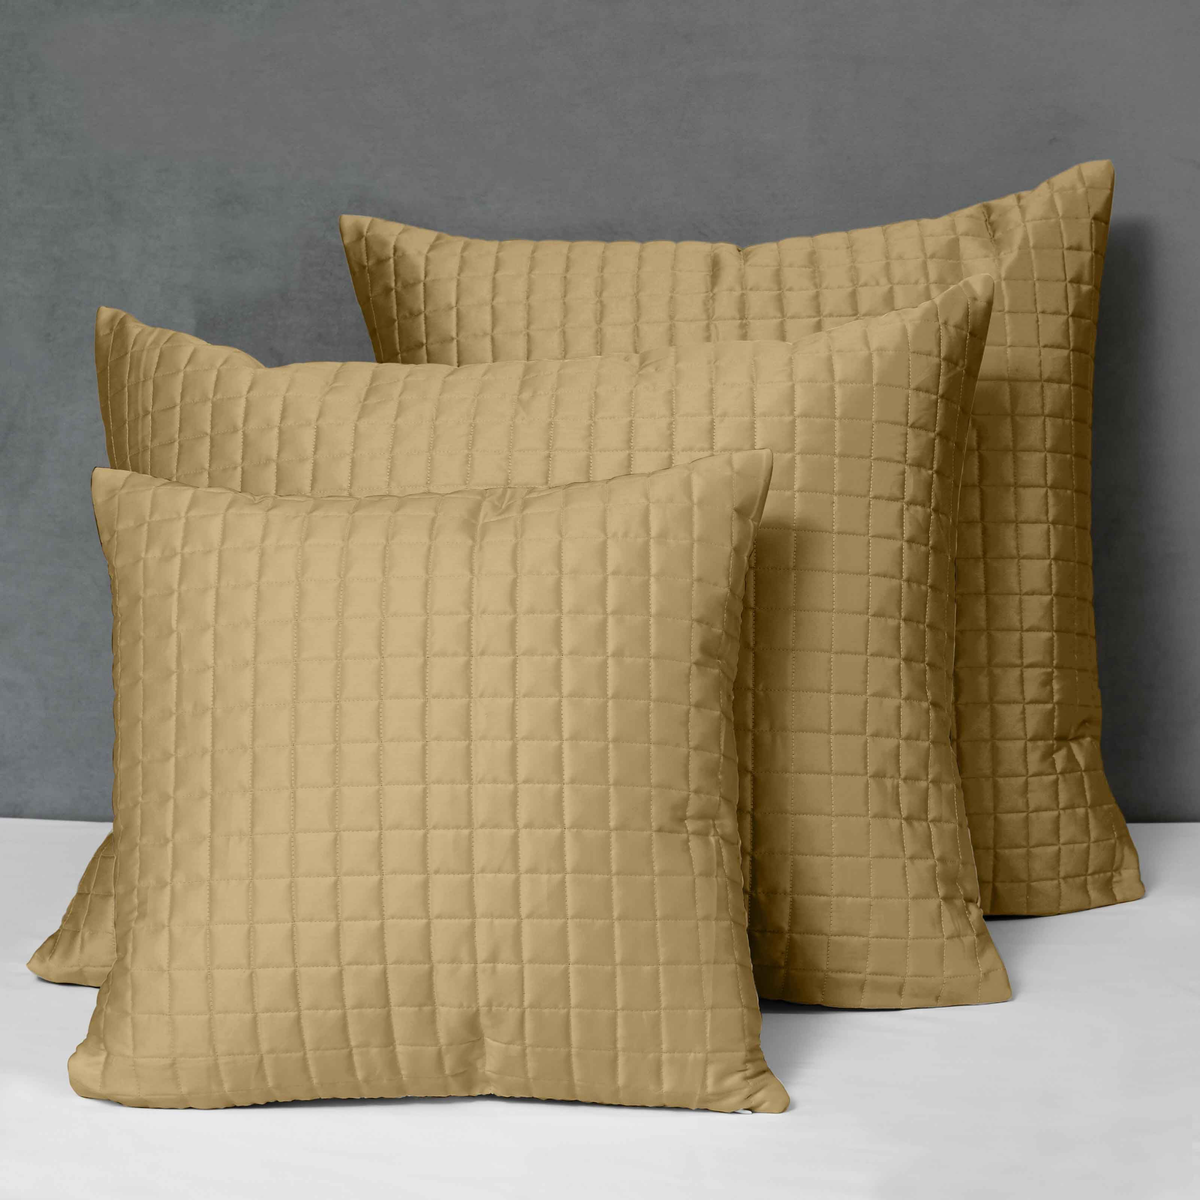 Different Sizes of Quilted Shams of Signoria Masaccio Bedding in Caramel  Color